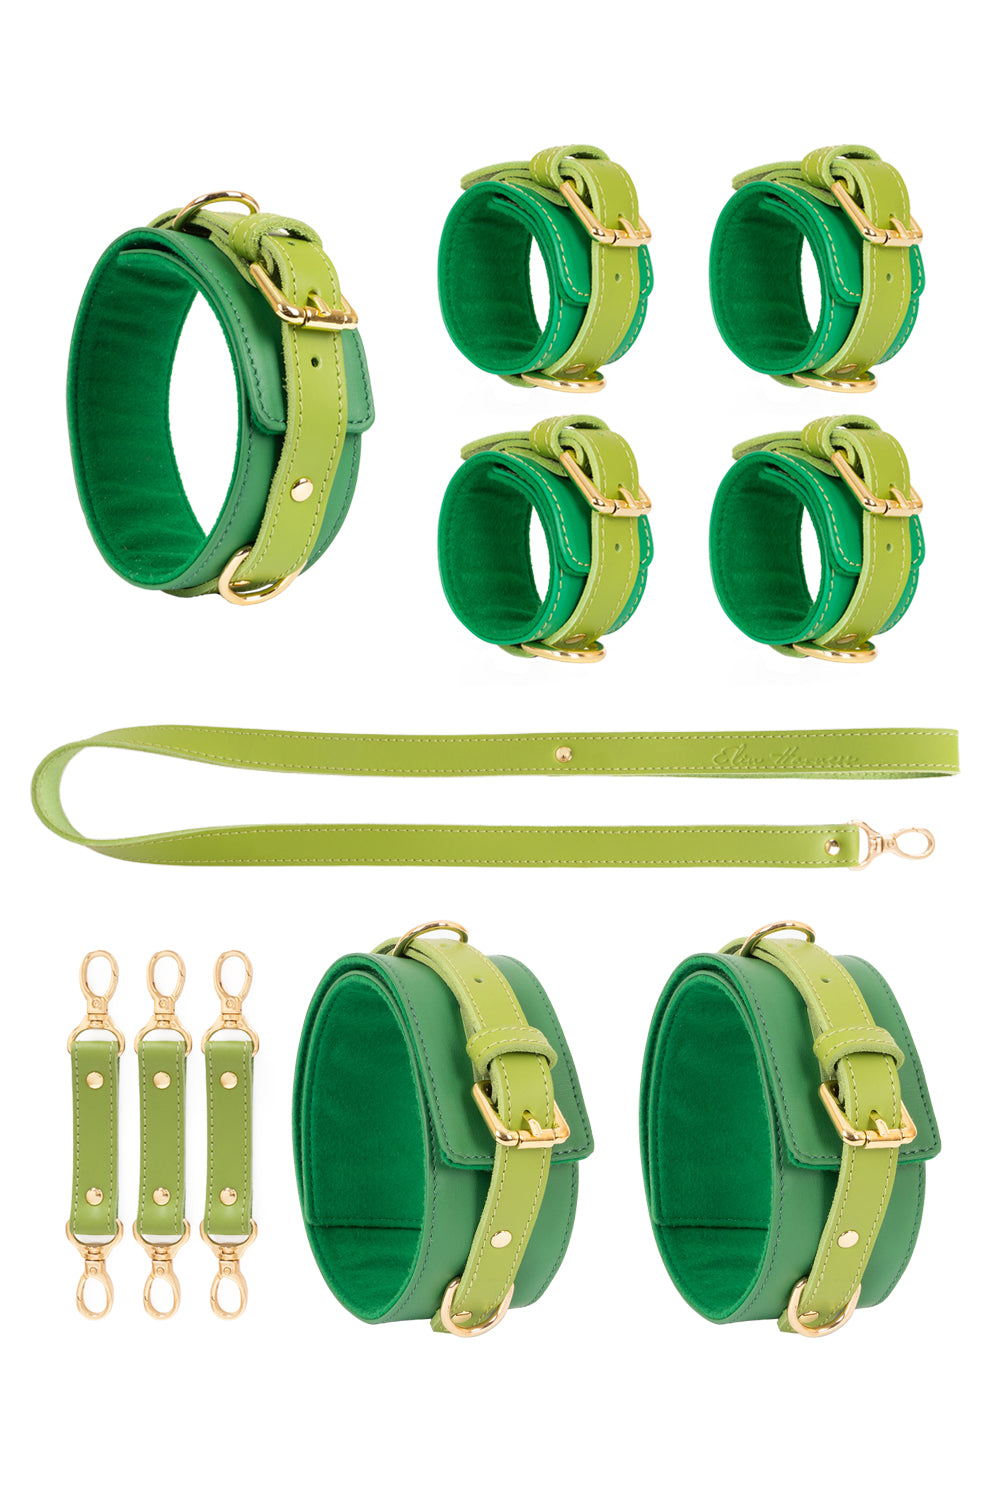 Deal of the day BDSM Leather Bondage Set Green